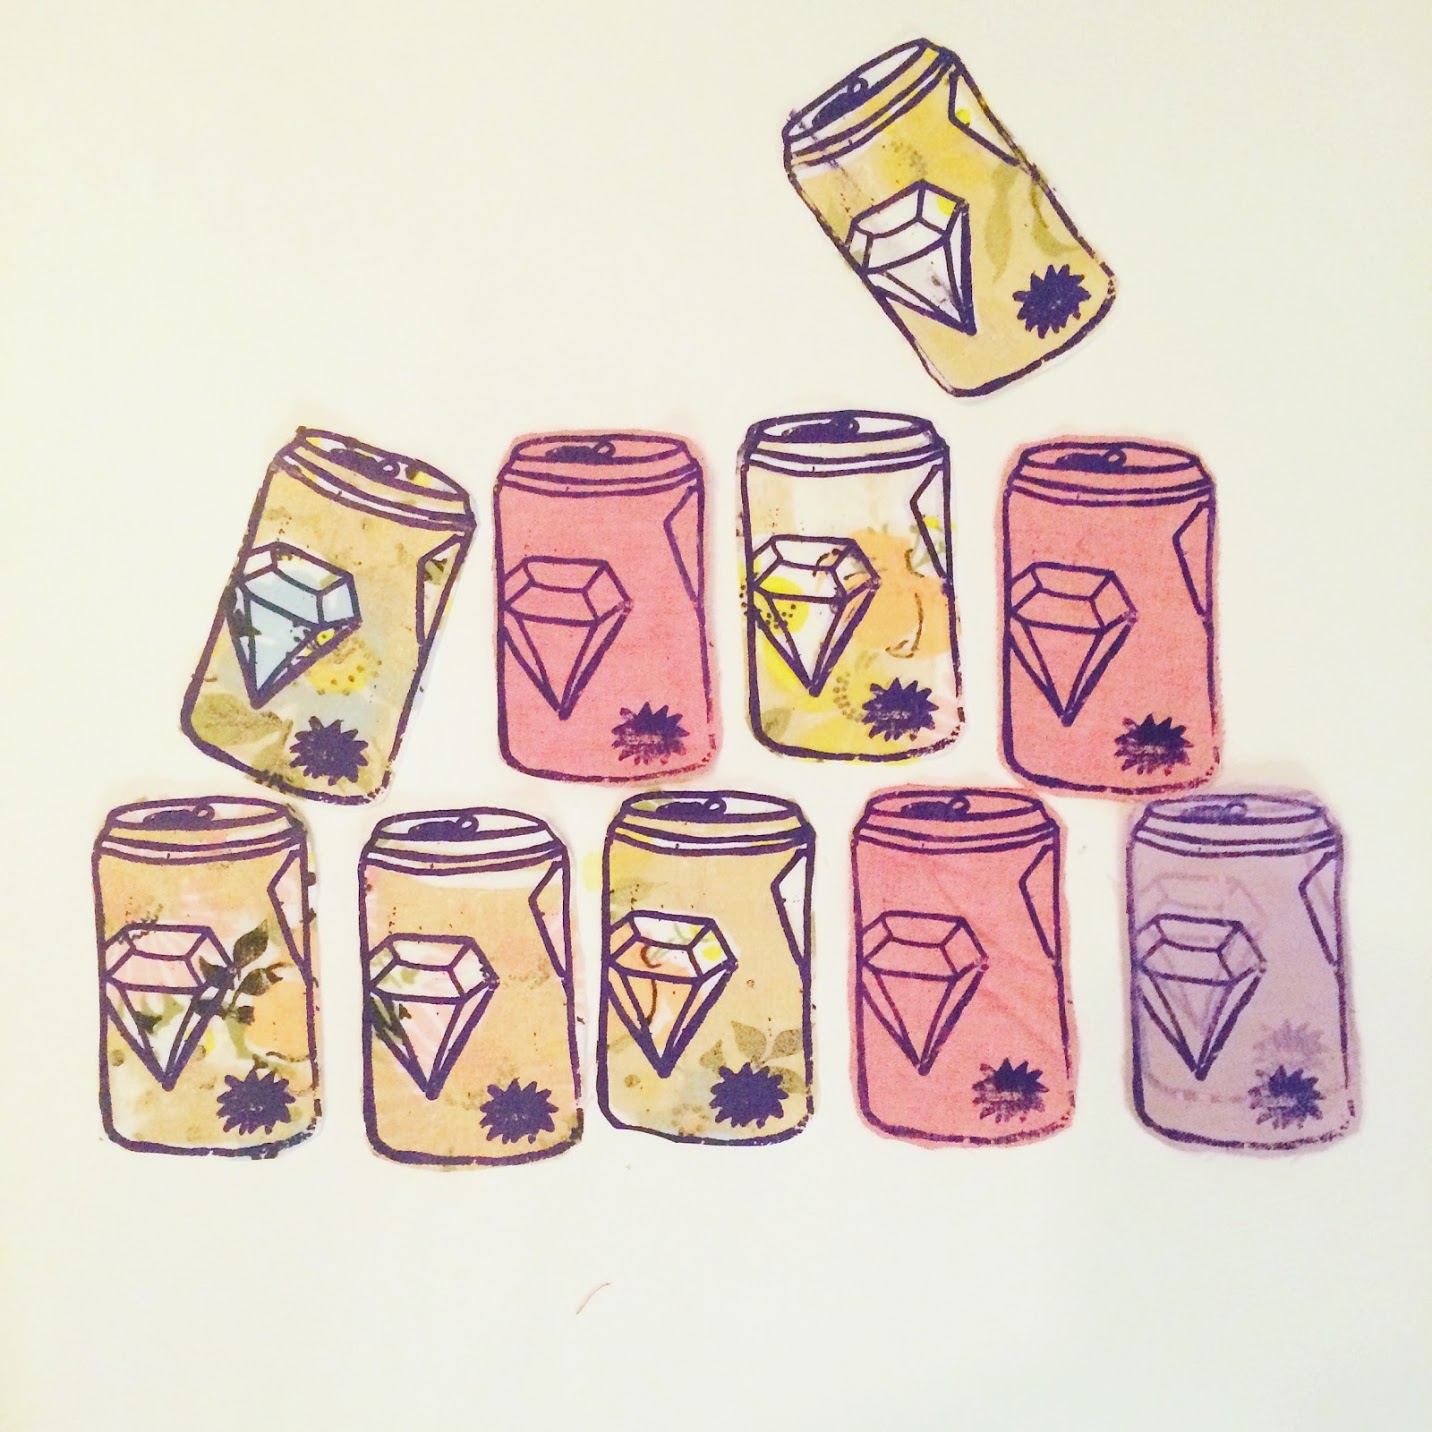 watercolor painting of beer cans